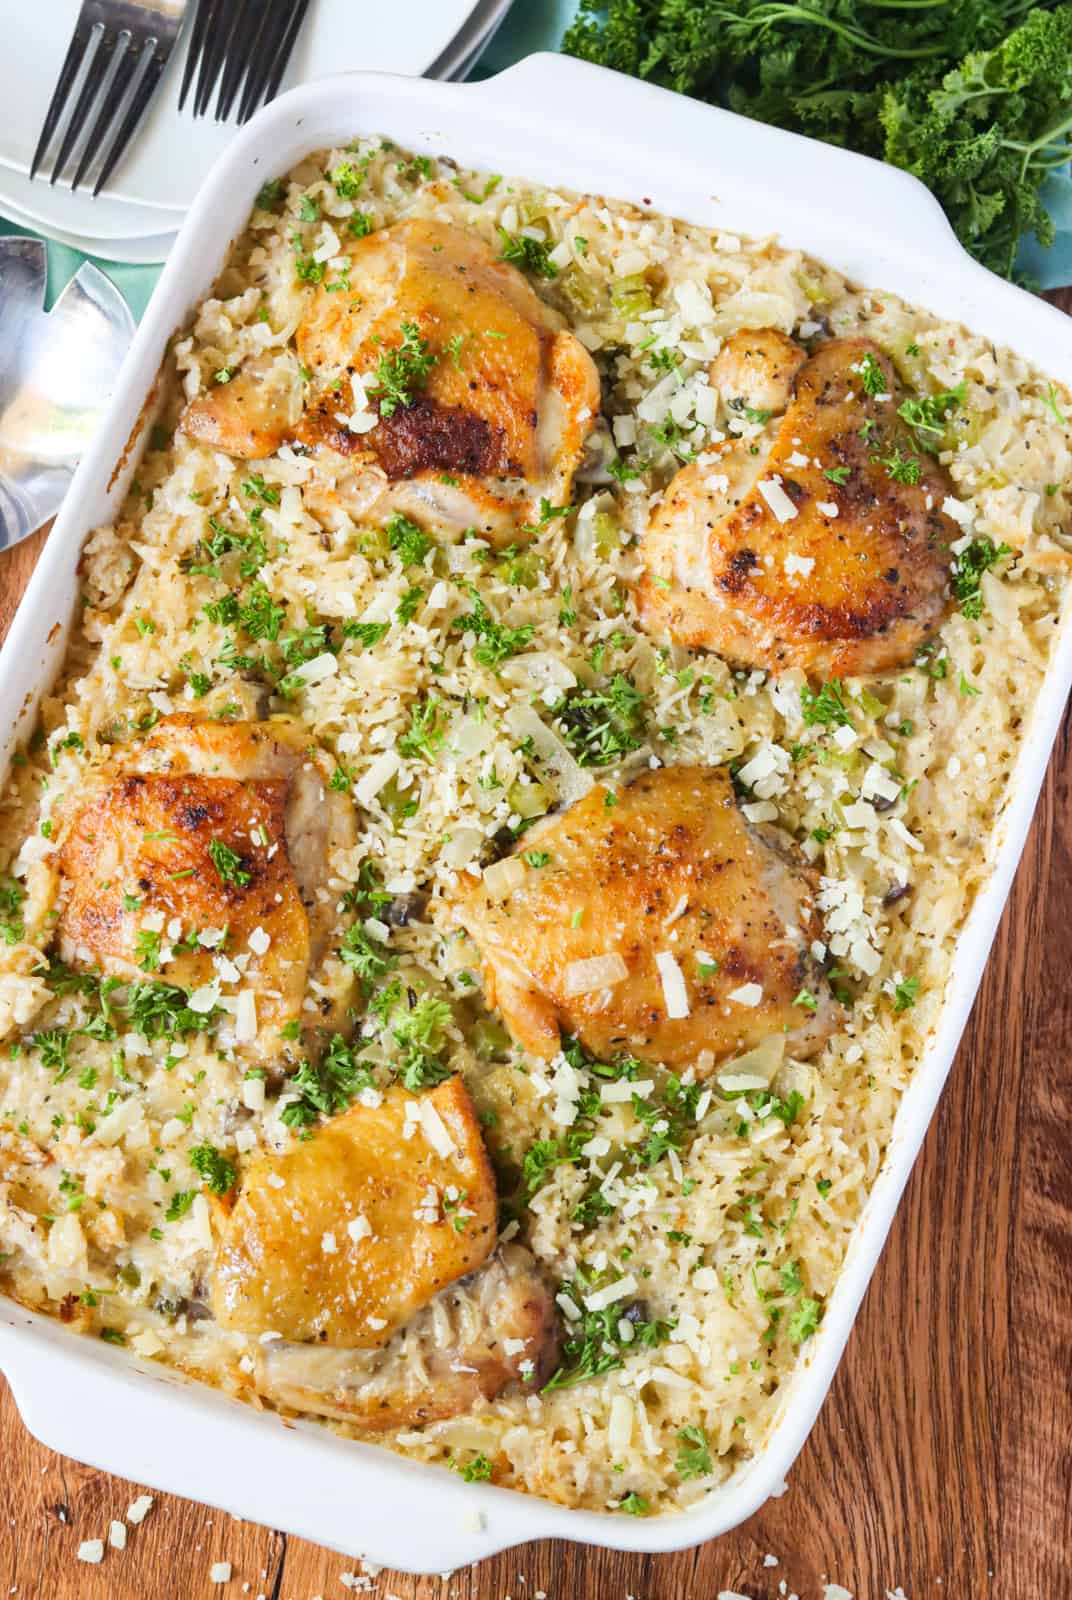 A flavorful chicken and rice casserole fresh from the oven